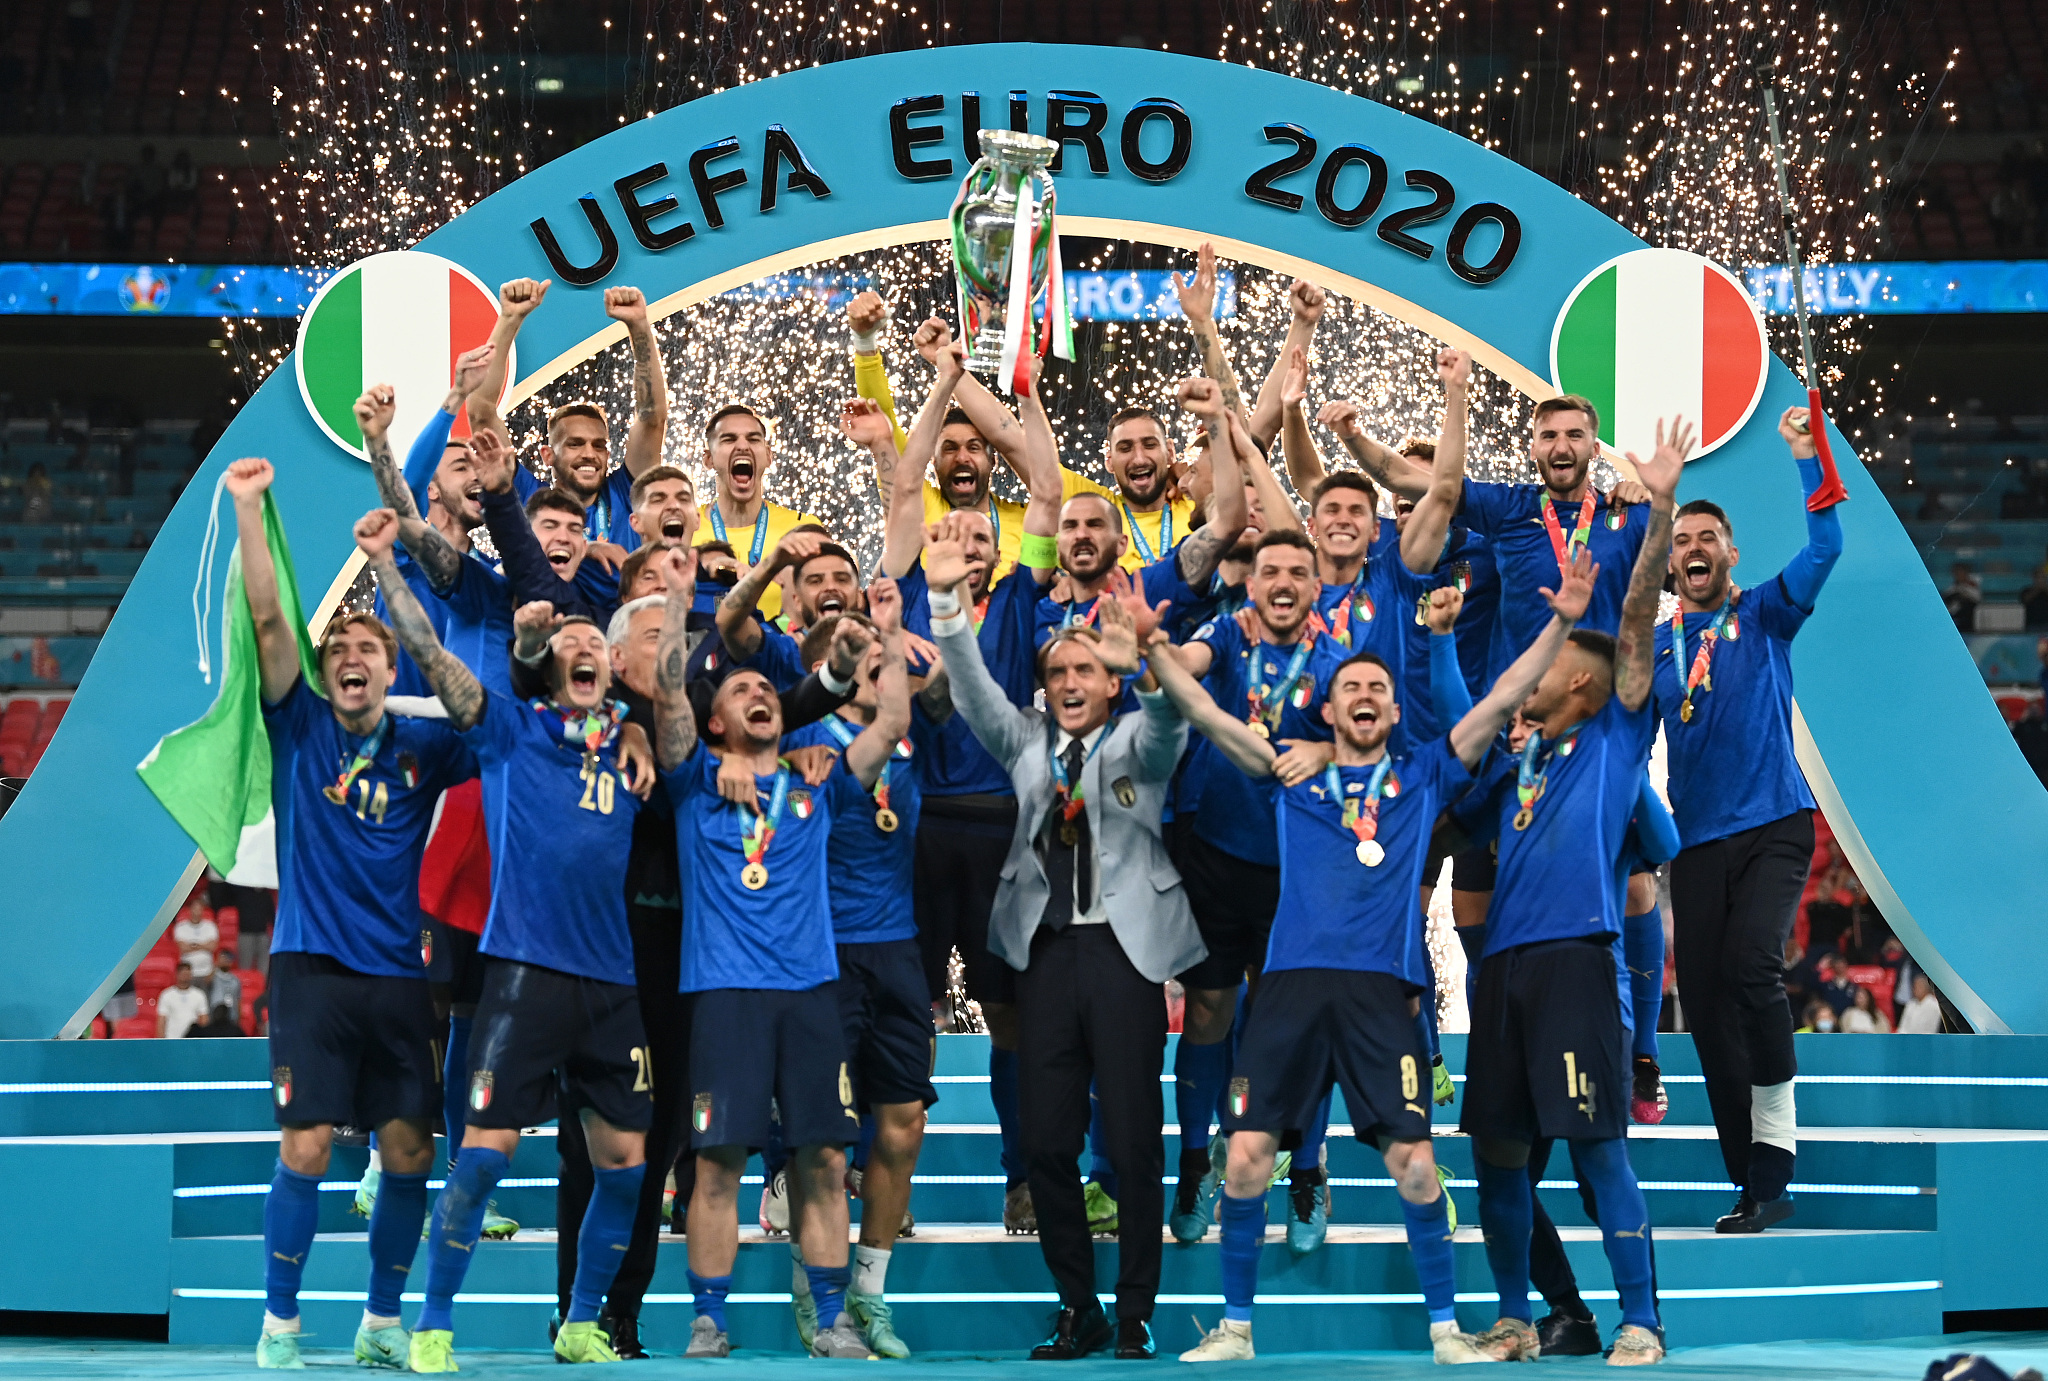 Players of Italy and their coach Roberto Mancini celebrate on the podium after winning the Euro 2020 final at Wembley Stadium in London, England, July 11, 2021. /CFP